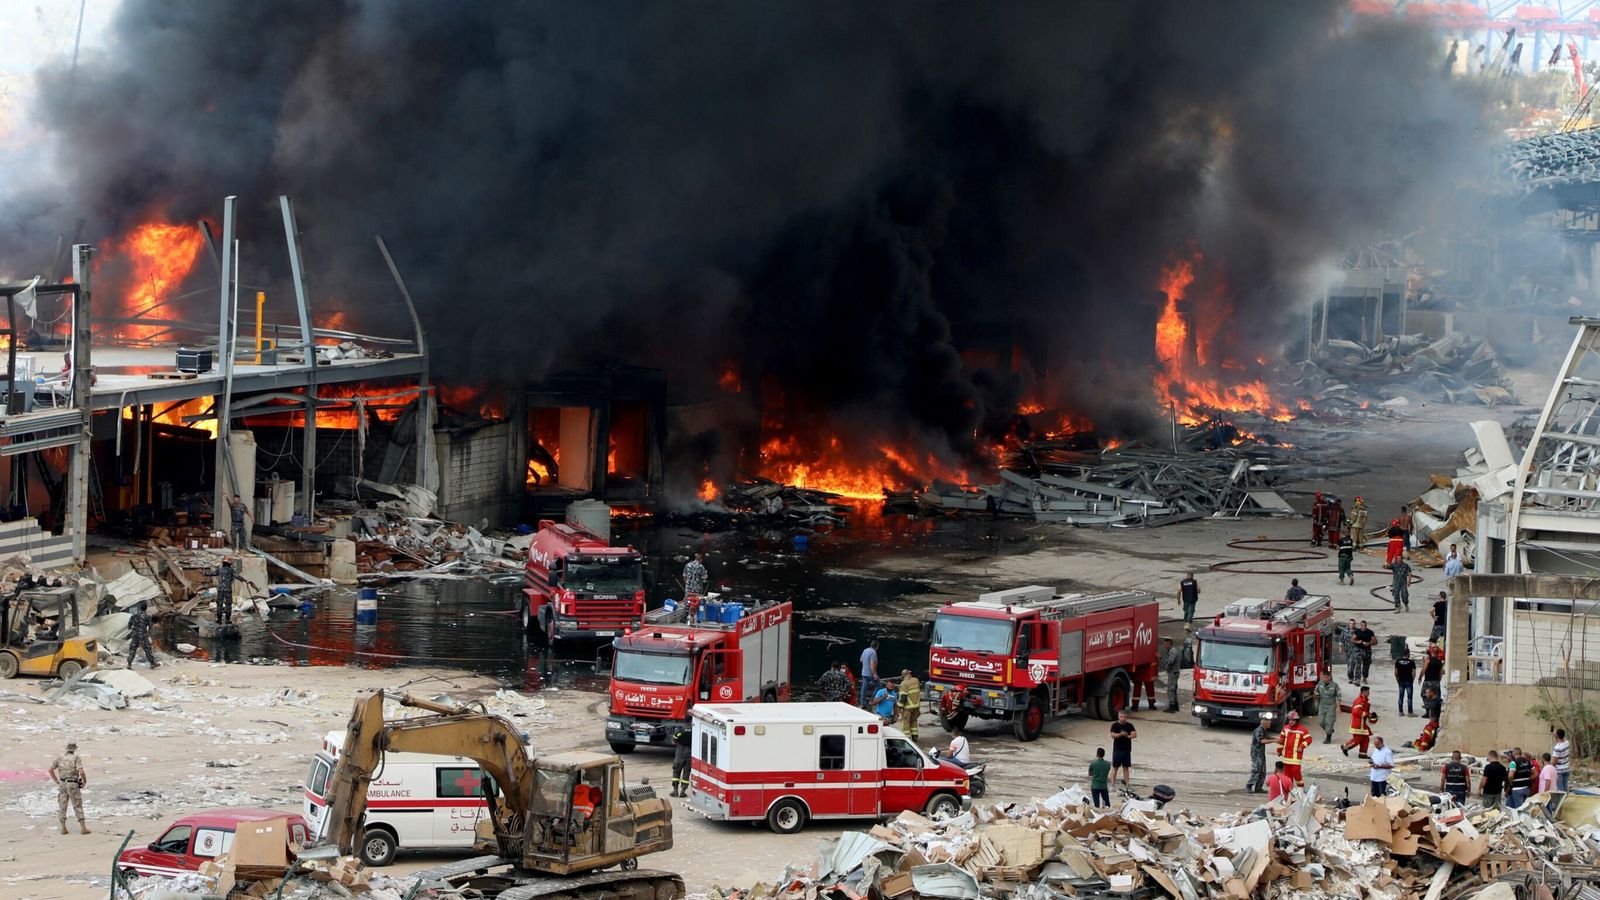 beirut-huge-fire-erupts-in-citys-port-one-month-after-deadly-explosion-world-news-sky-news